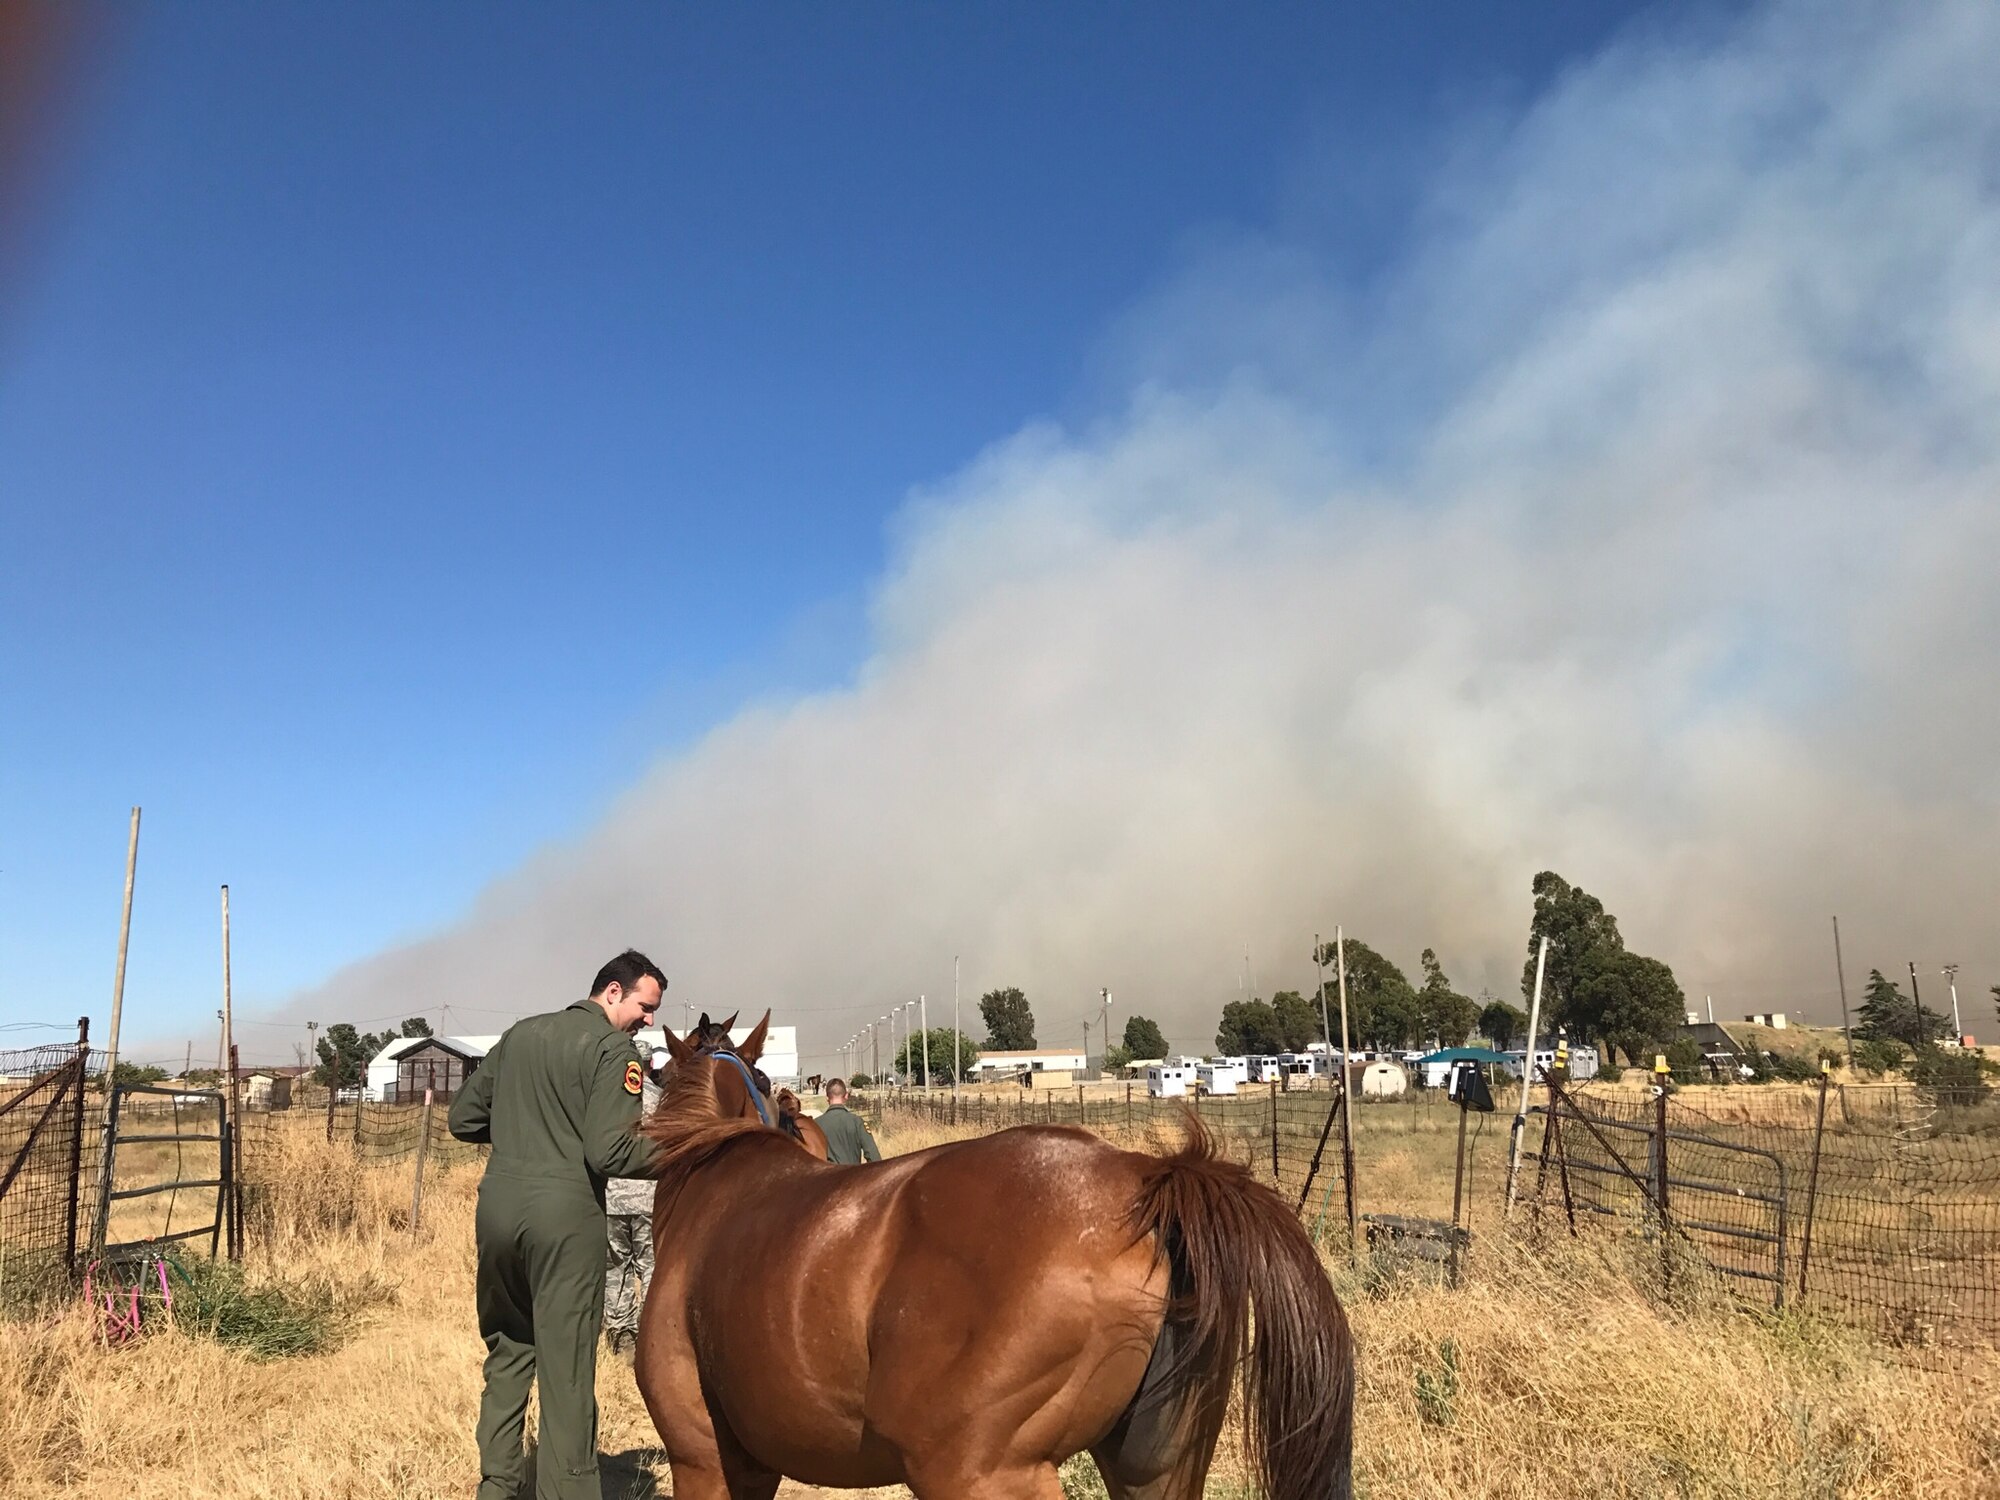 Capt. Evan Rodts, 21st Airlift Squadron, evacuates a horse July 6 from a turnout at the Travis Equestrian Center during a grass fire at Travis Air Force Base, Calif. (Courtesy photo)